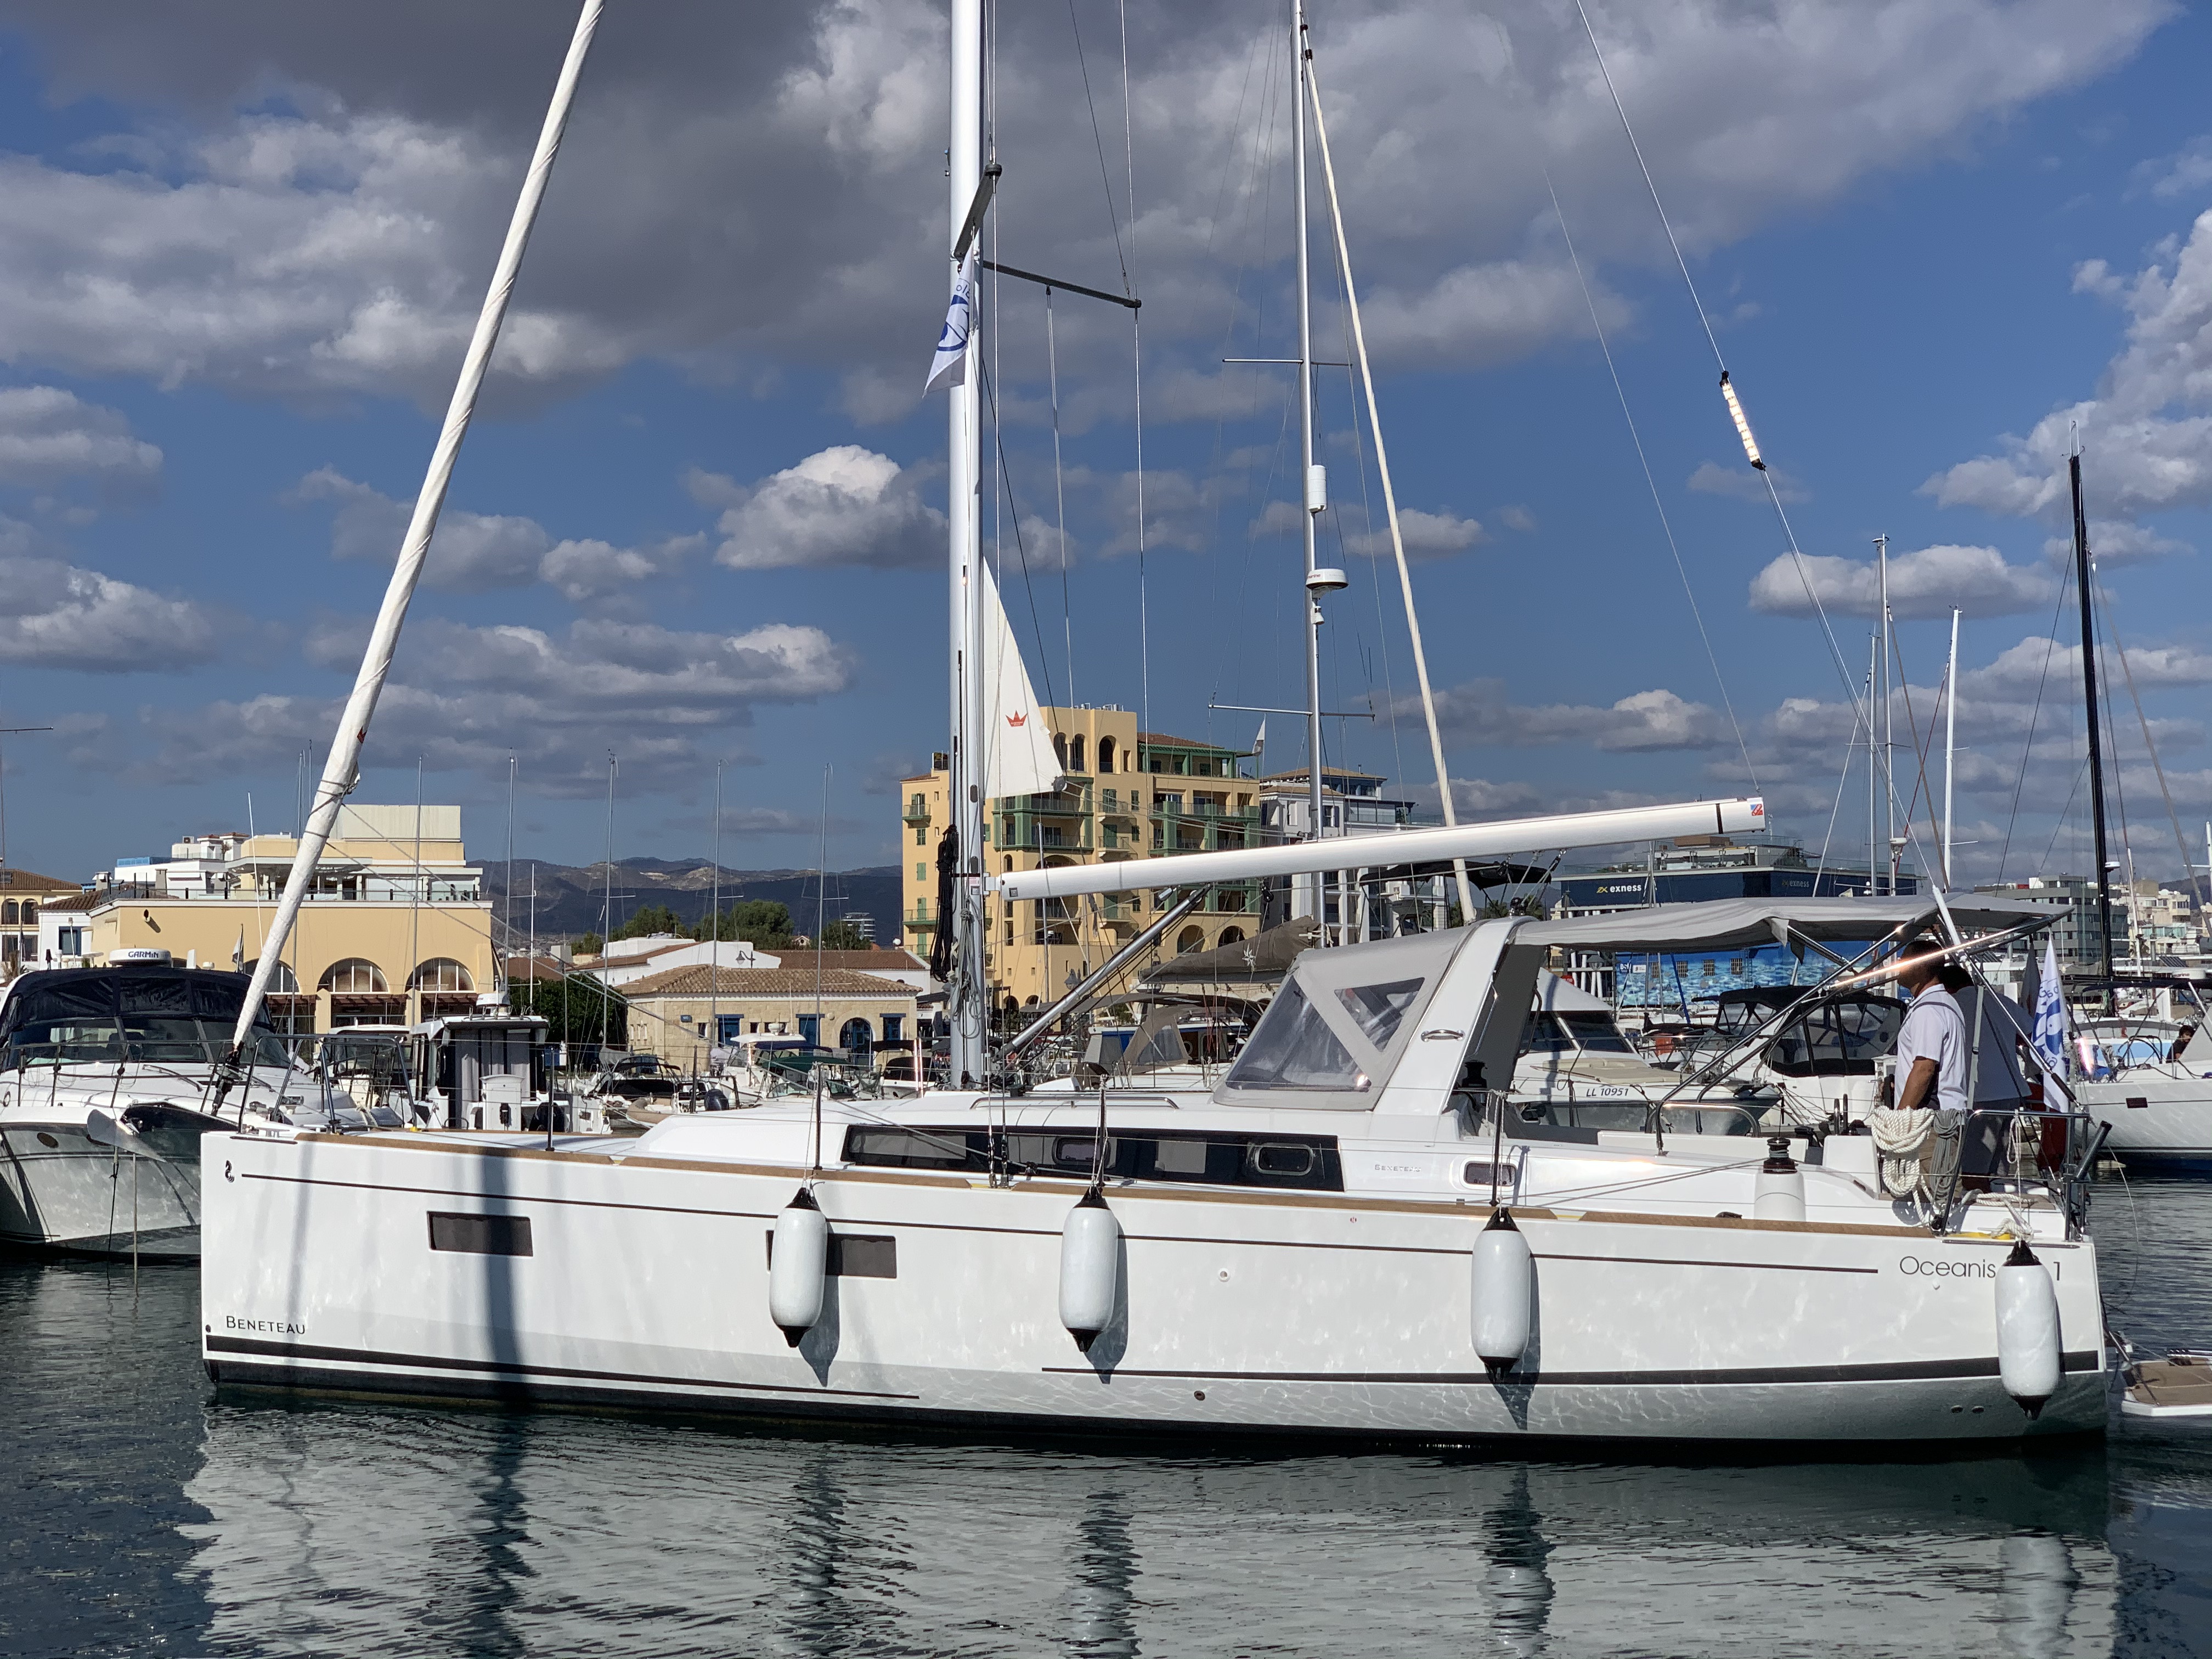 Oceanis 38.1 - Yacht Charter Cyprus & Boat hire in Cyprus Limassol Limassol Marina 1